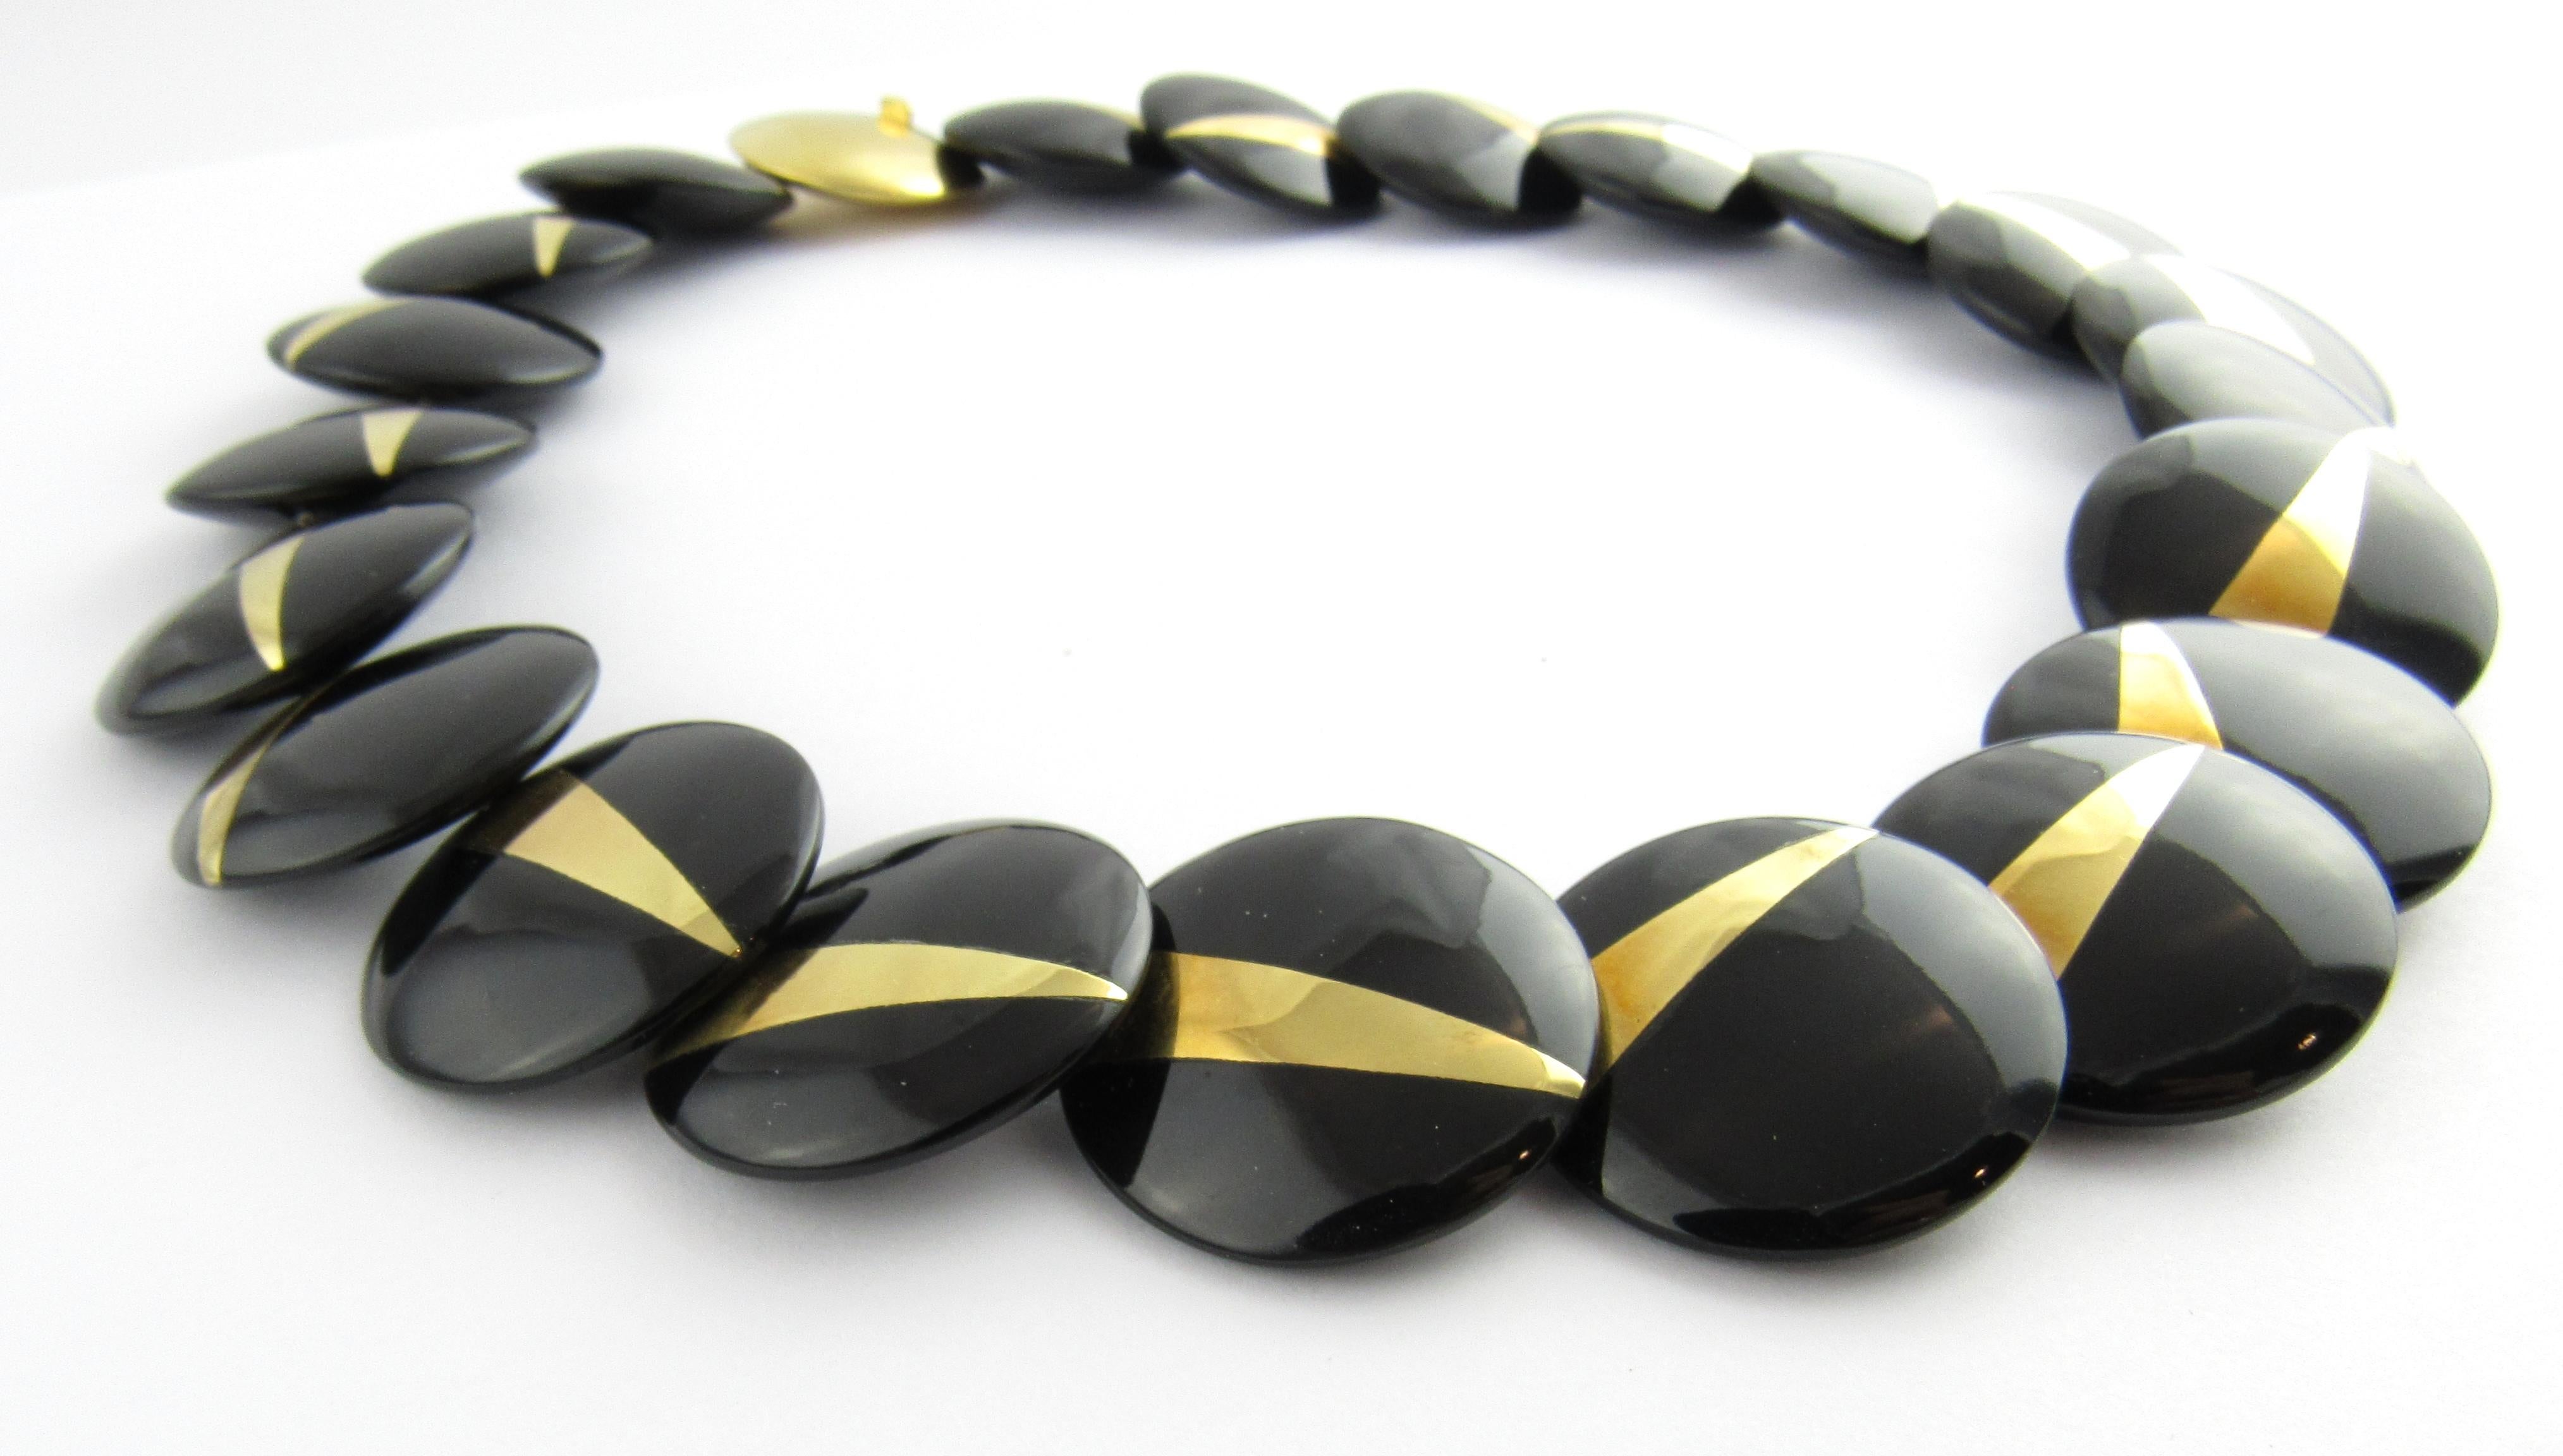 1982 Tiffany & Co. Angela Cummings 18K Yellow Gold and Black Onyx Lentil Disc Necklace

This vintage authentic Tiffany & Co. necklace is approx. 17